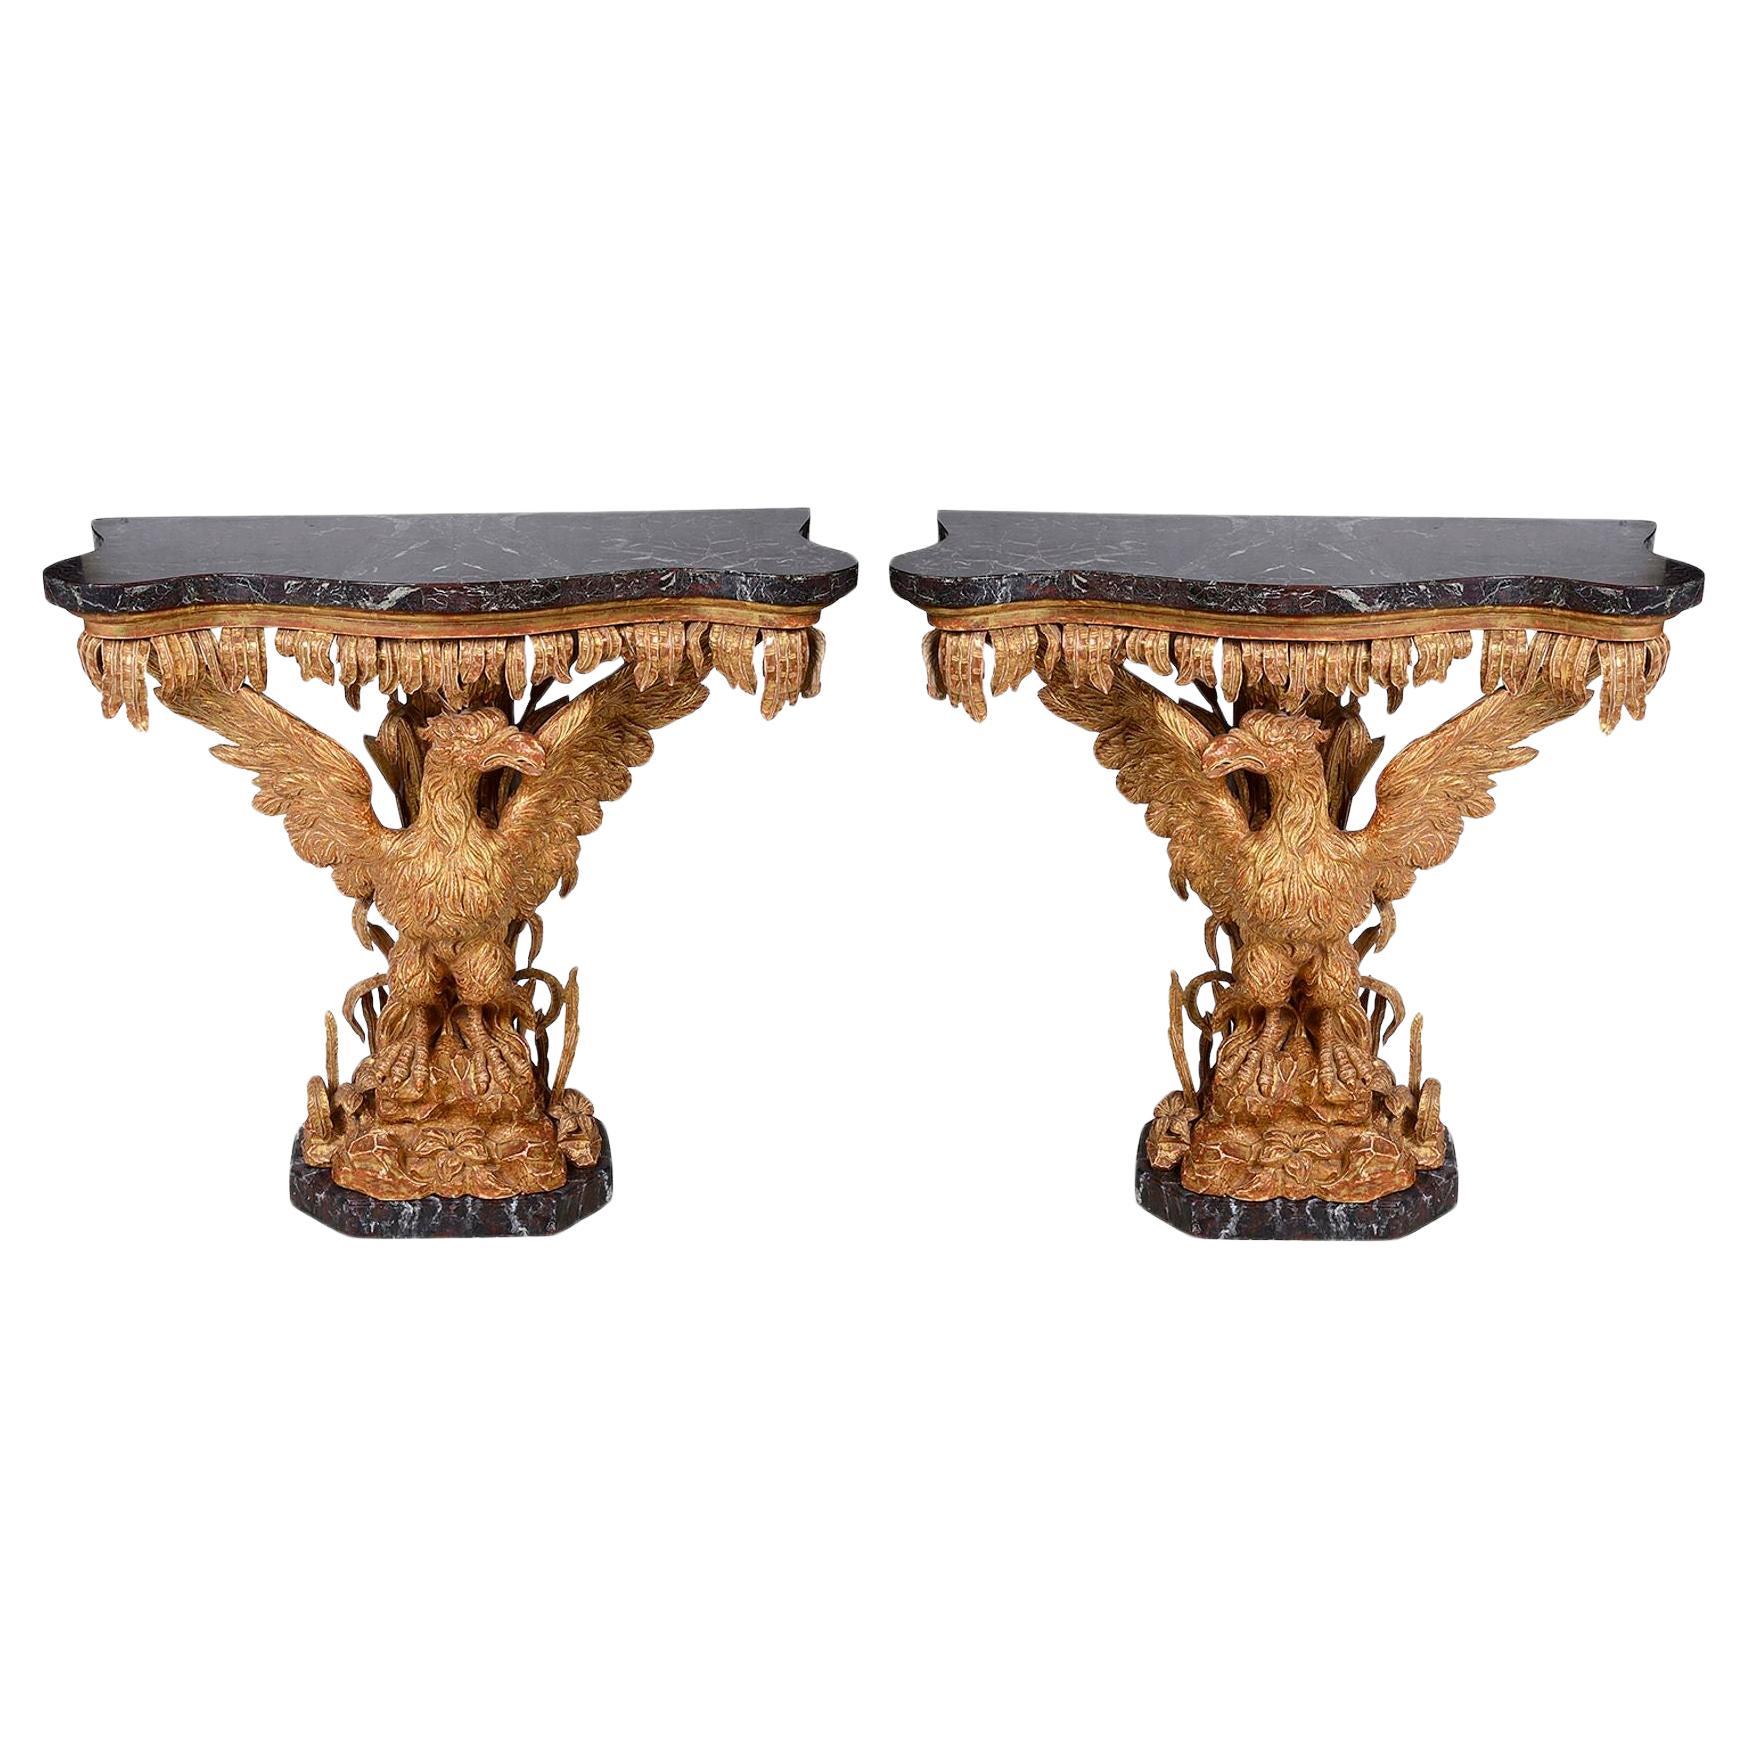 18th Century style gilt wood Eagle console tables